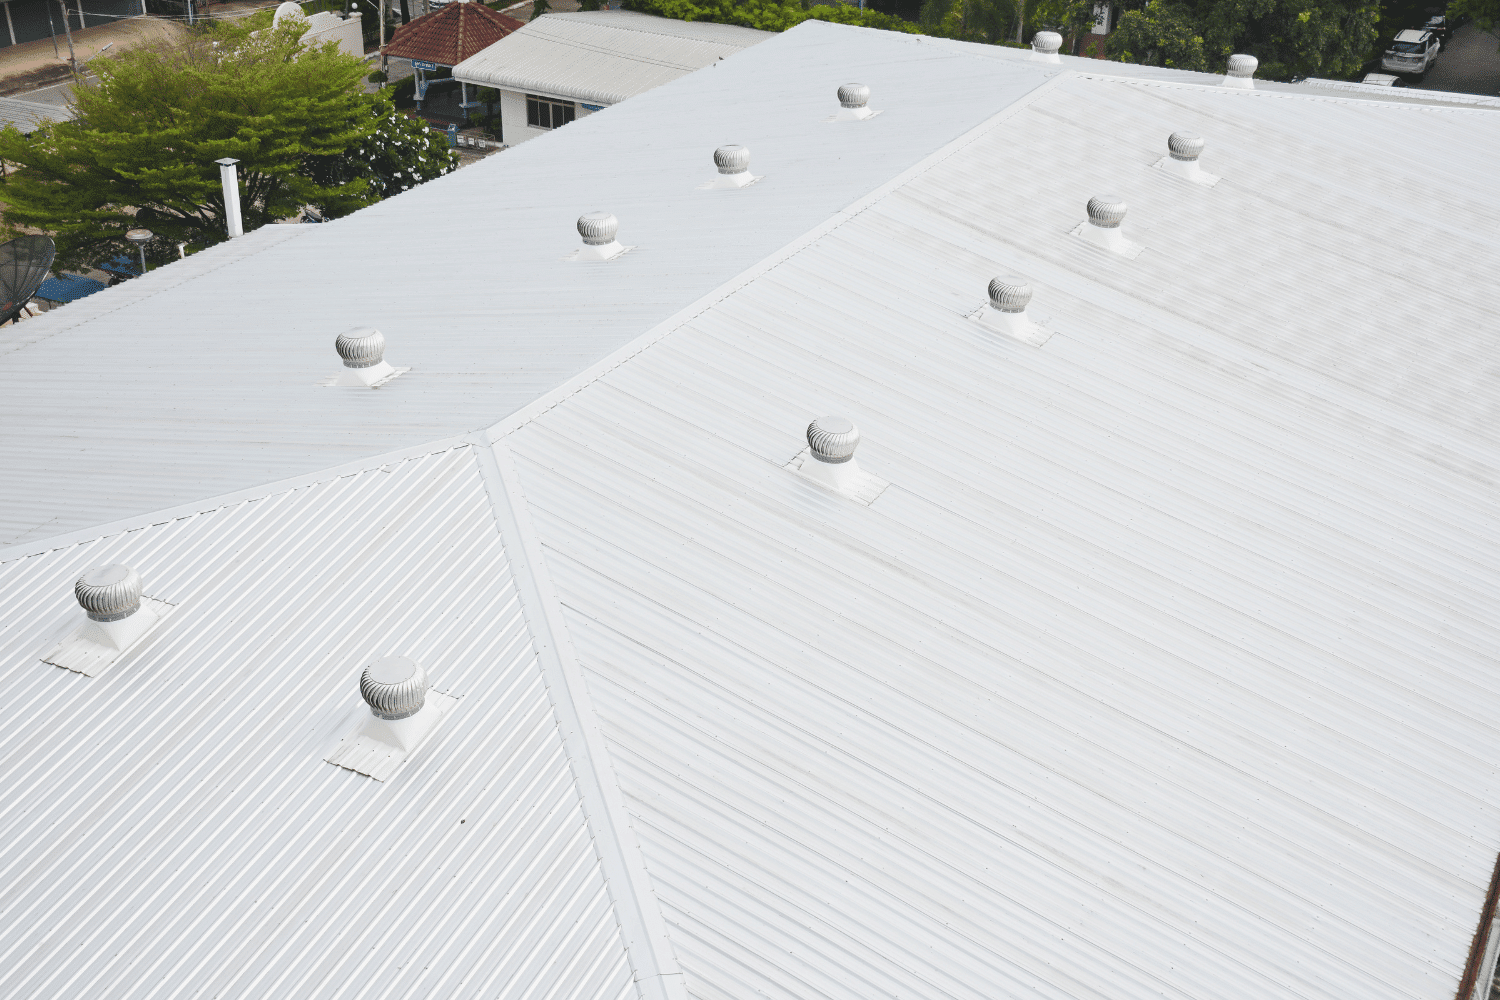 Eco-friendly roofing materials for sustainable living